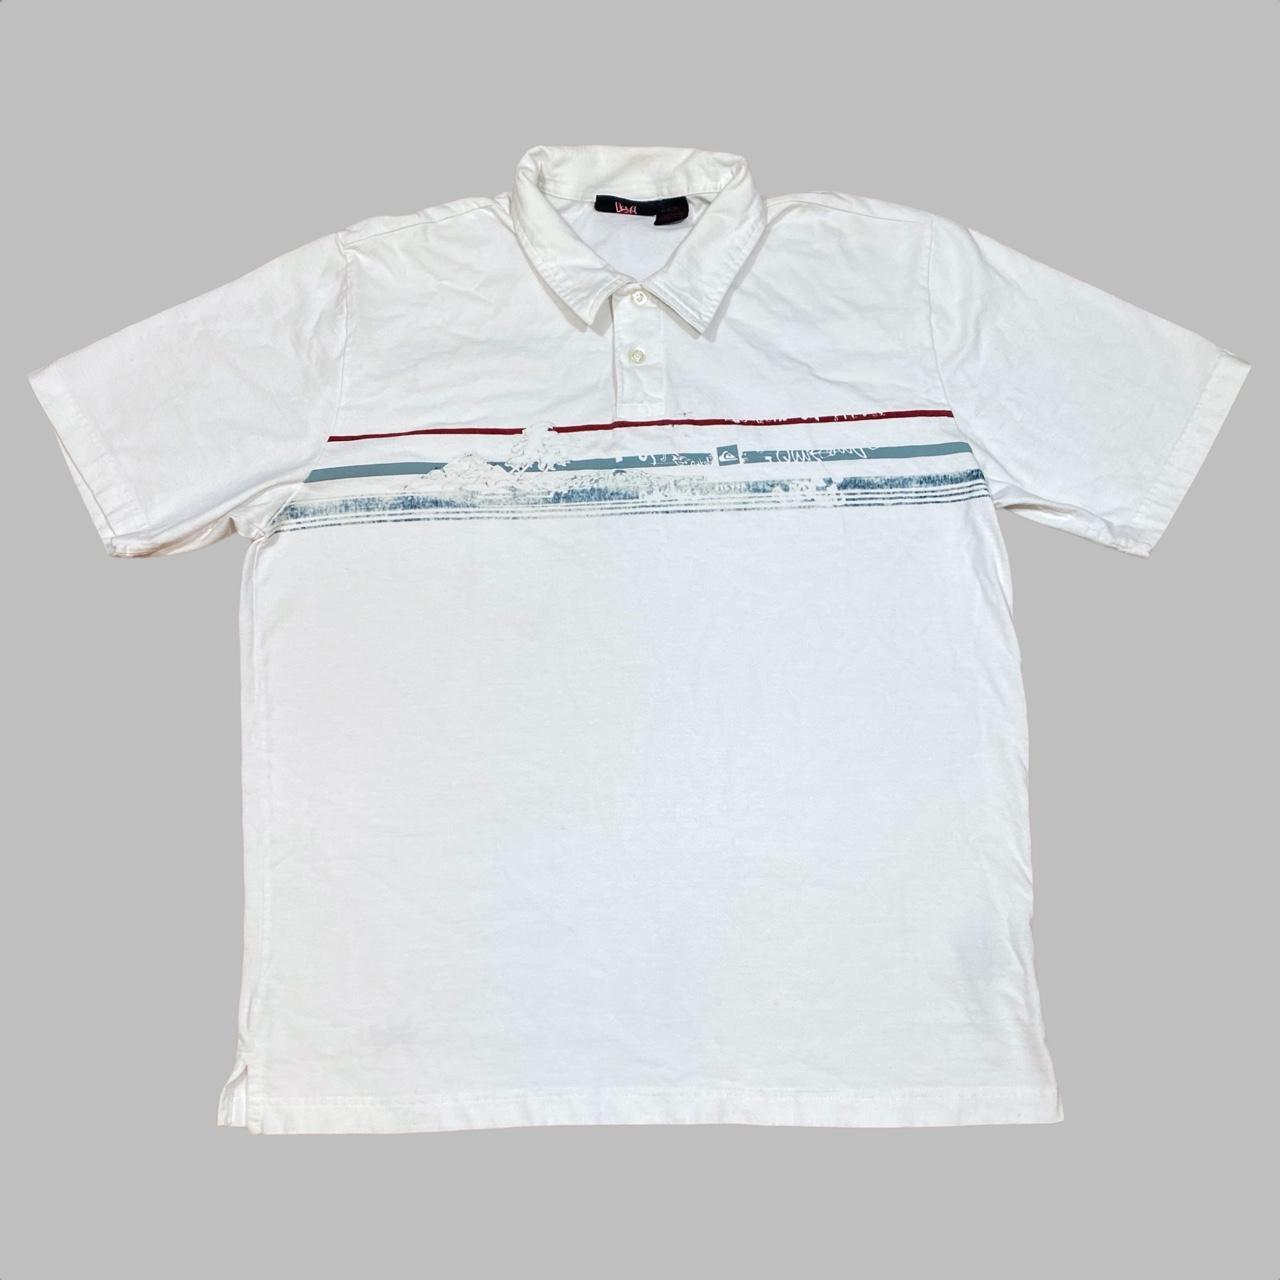 Quiksilver Men's White and Blue Polo-shirts